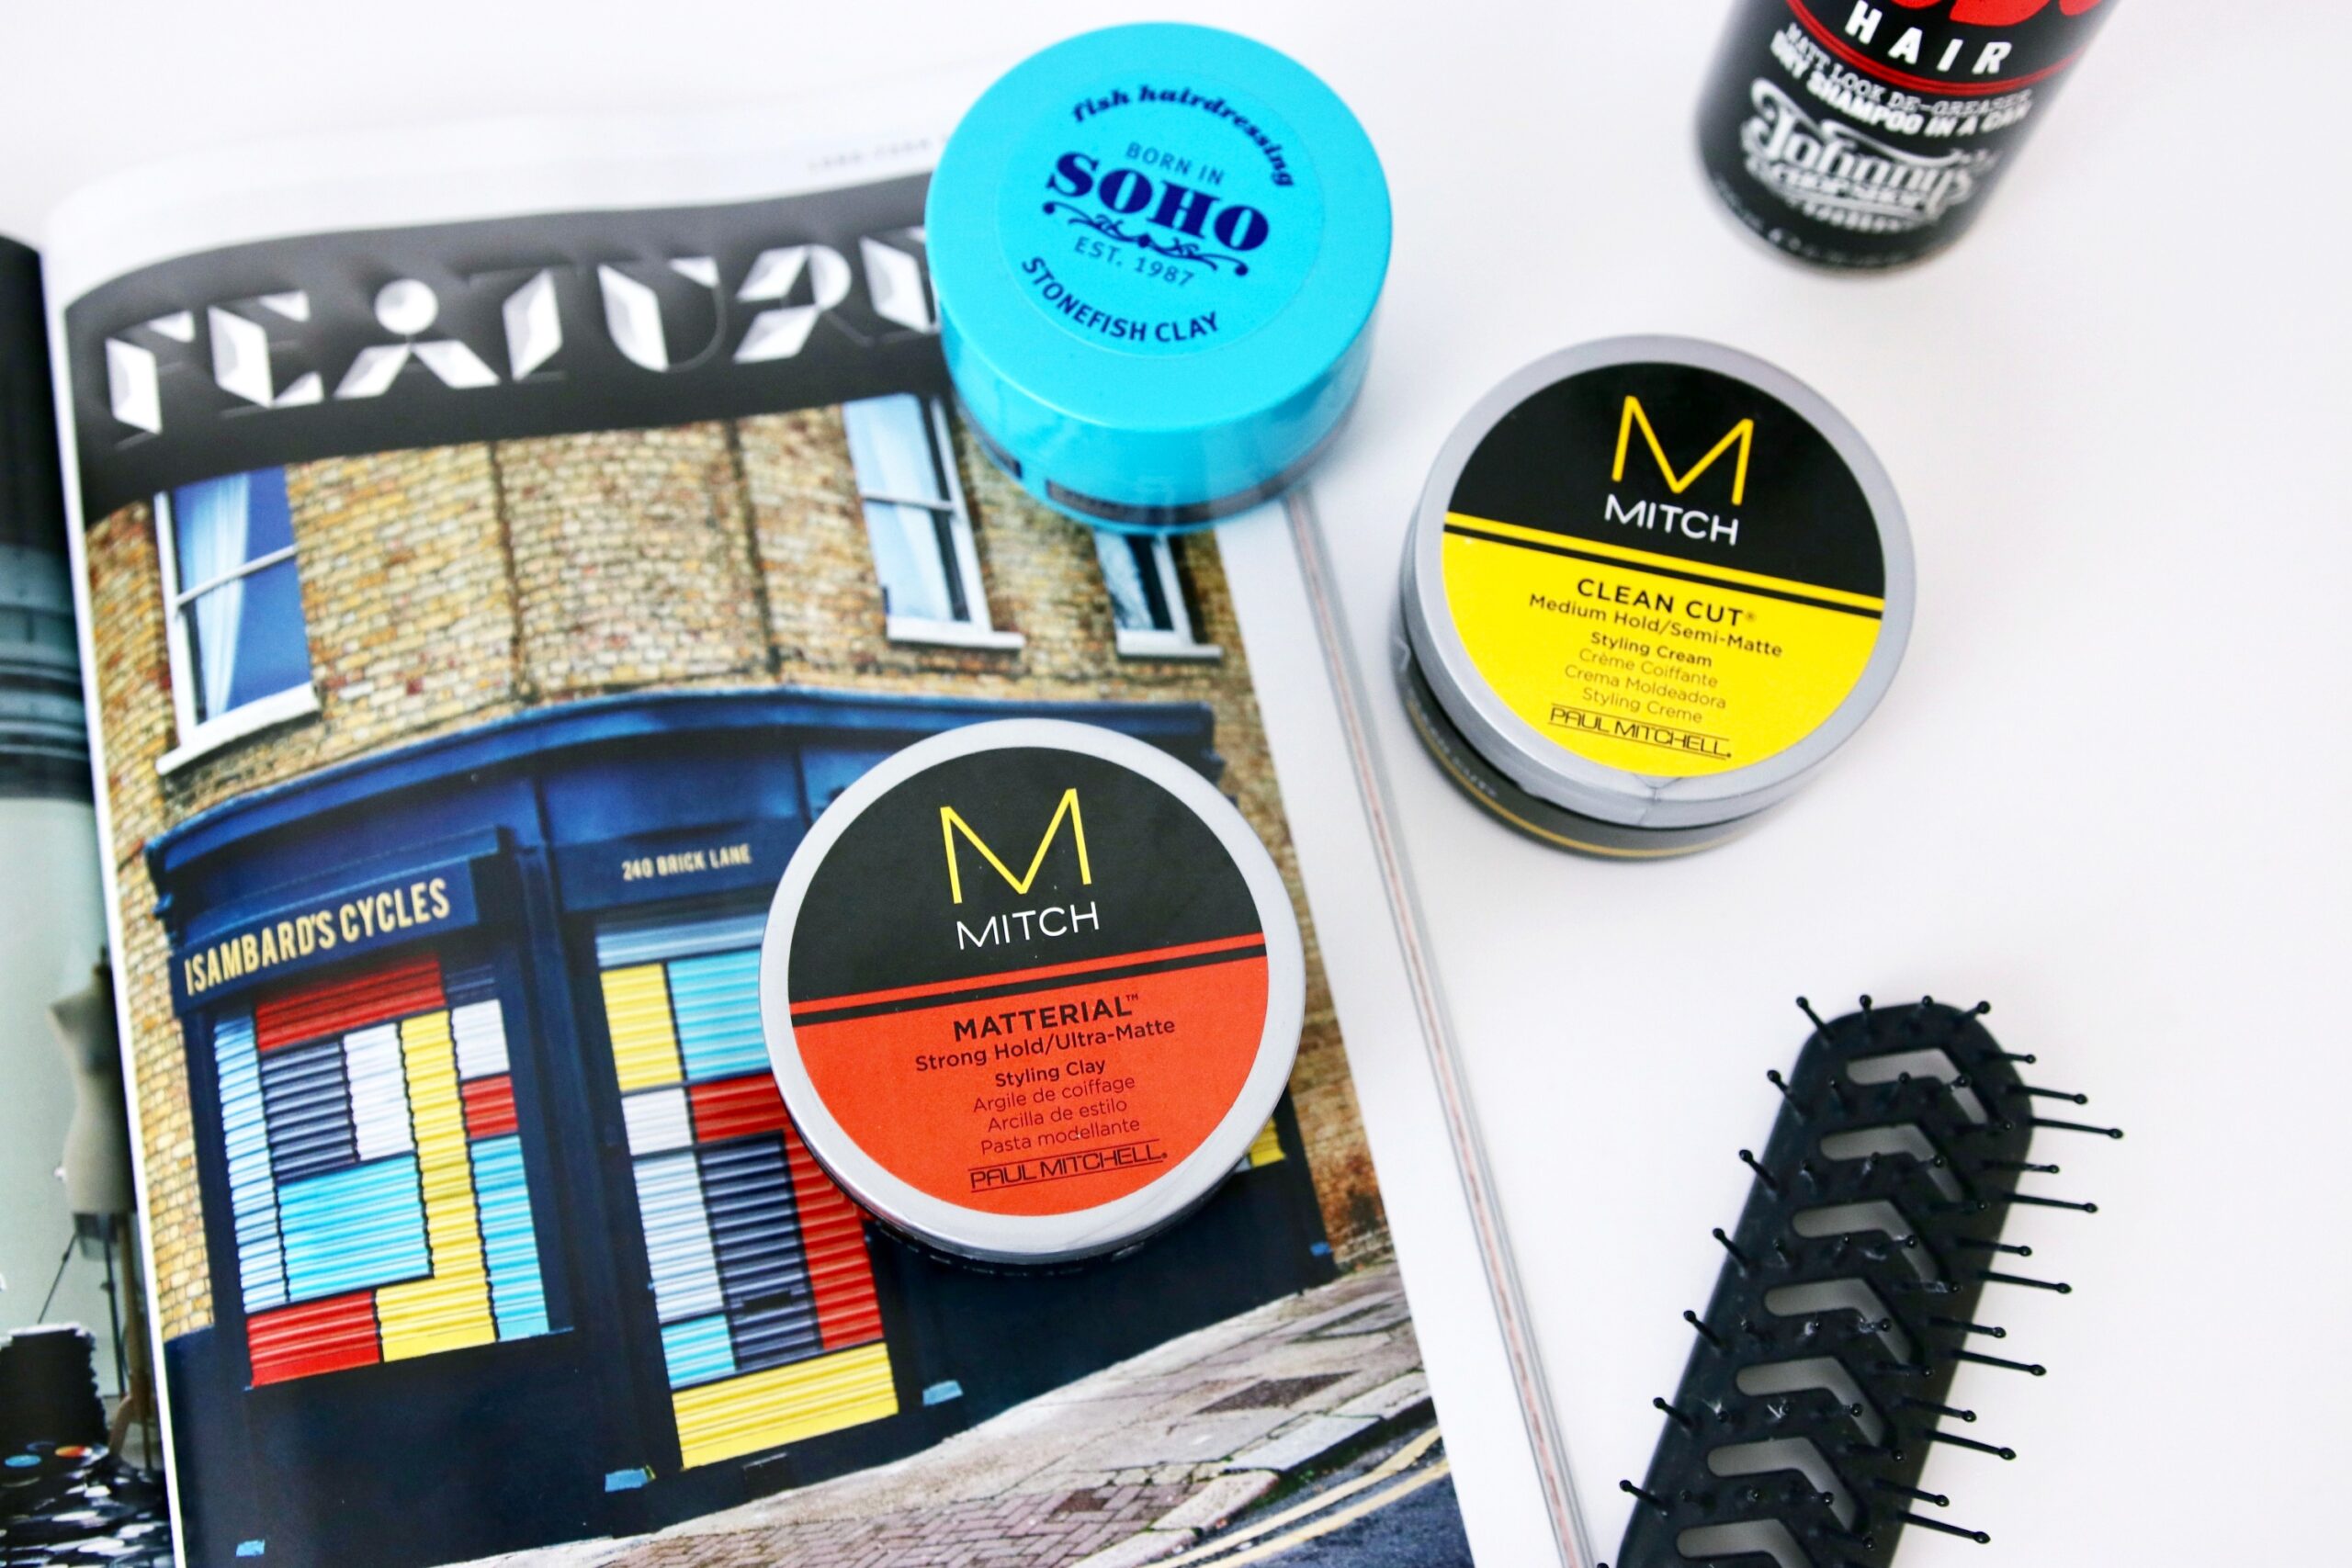 Best Men's Hair Styling Products - Paul Mitchell, Fish, L'Oreal Homme